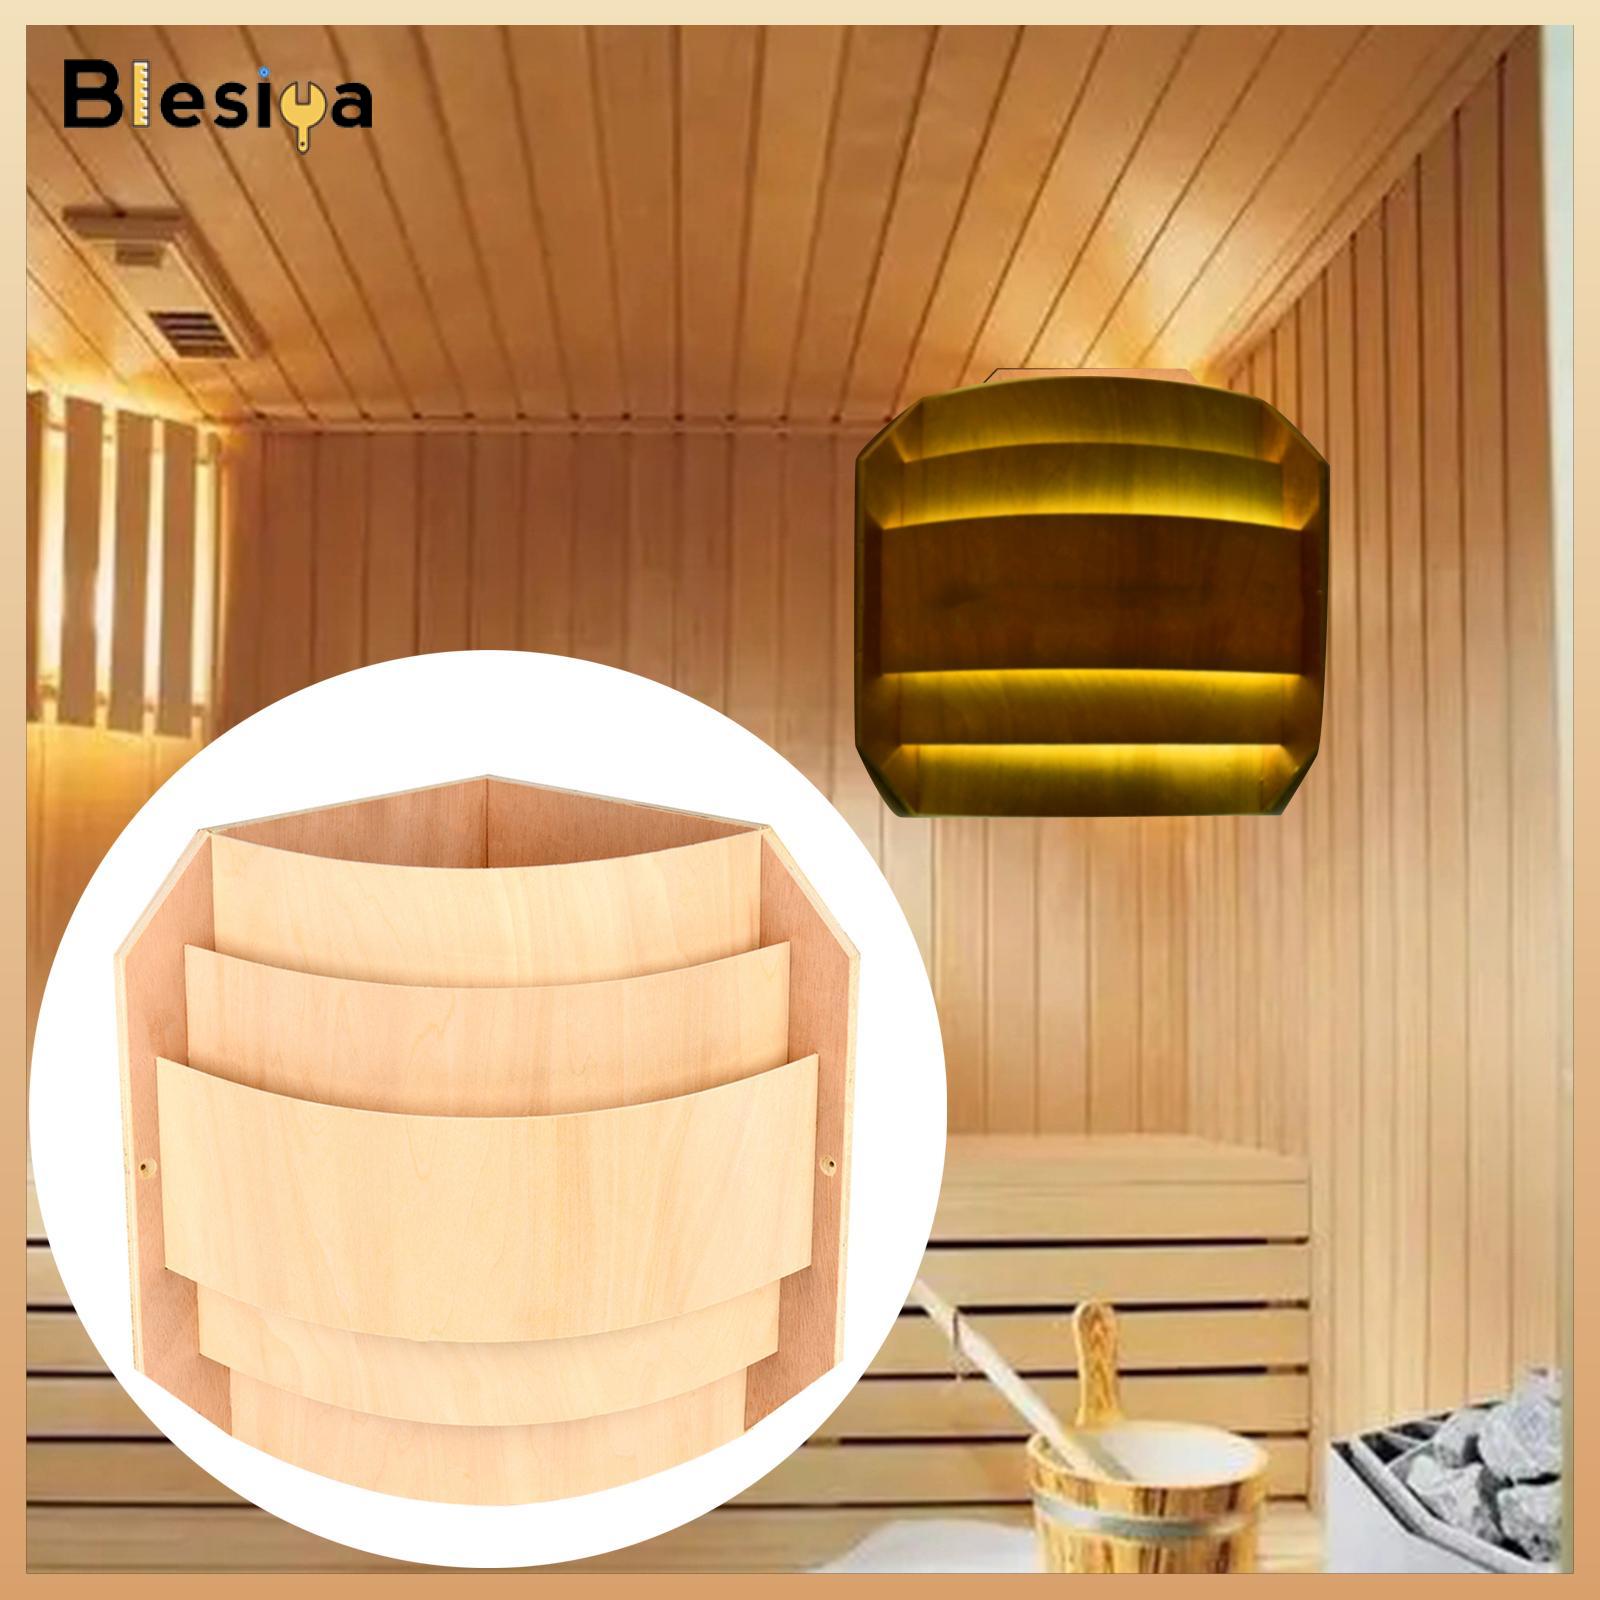 Blesiya Steam Room Lampshade Cover Wooden for SPA Decor High Temperature